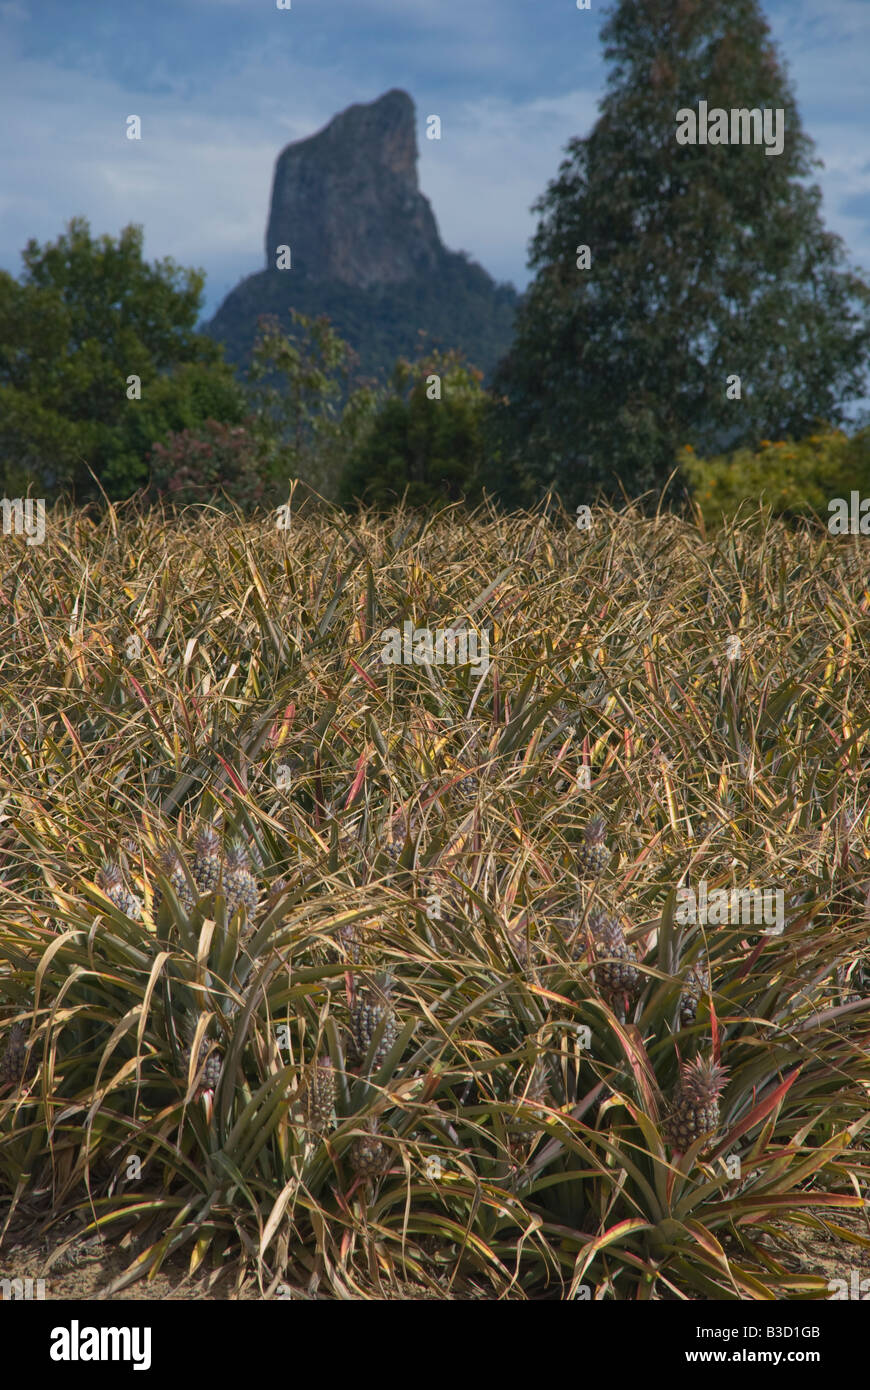 Pineapples growing in Queensland Australia against a backdrop of the Glasshouse Mountains Stock Photo